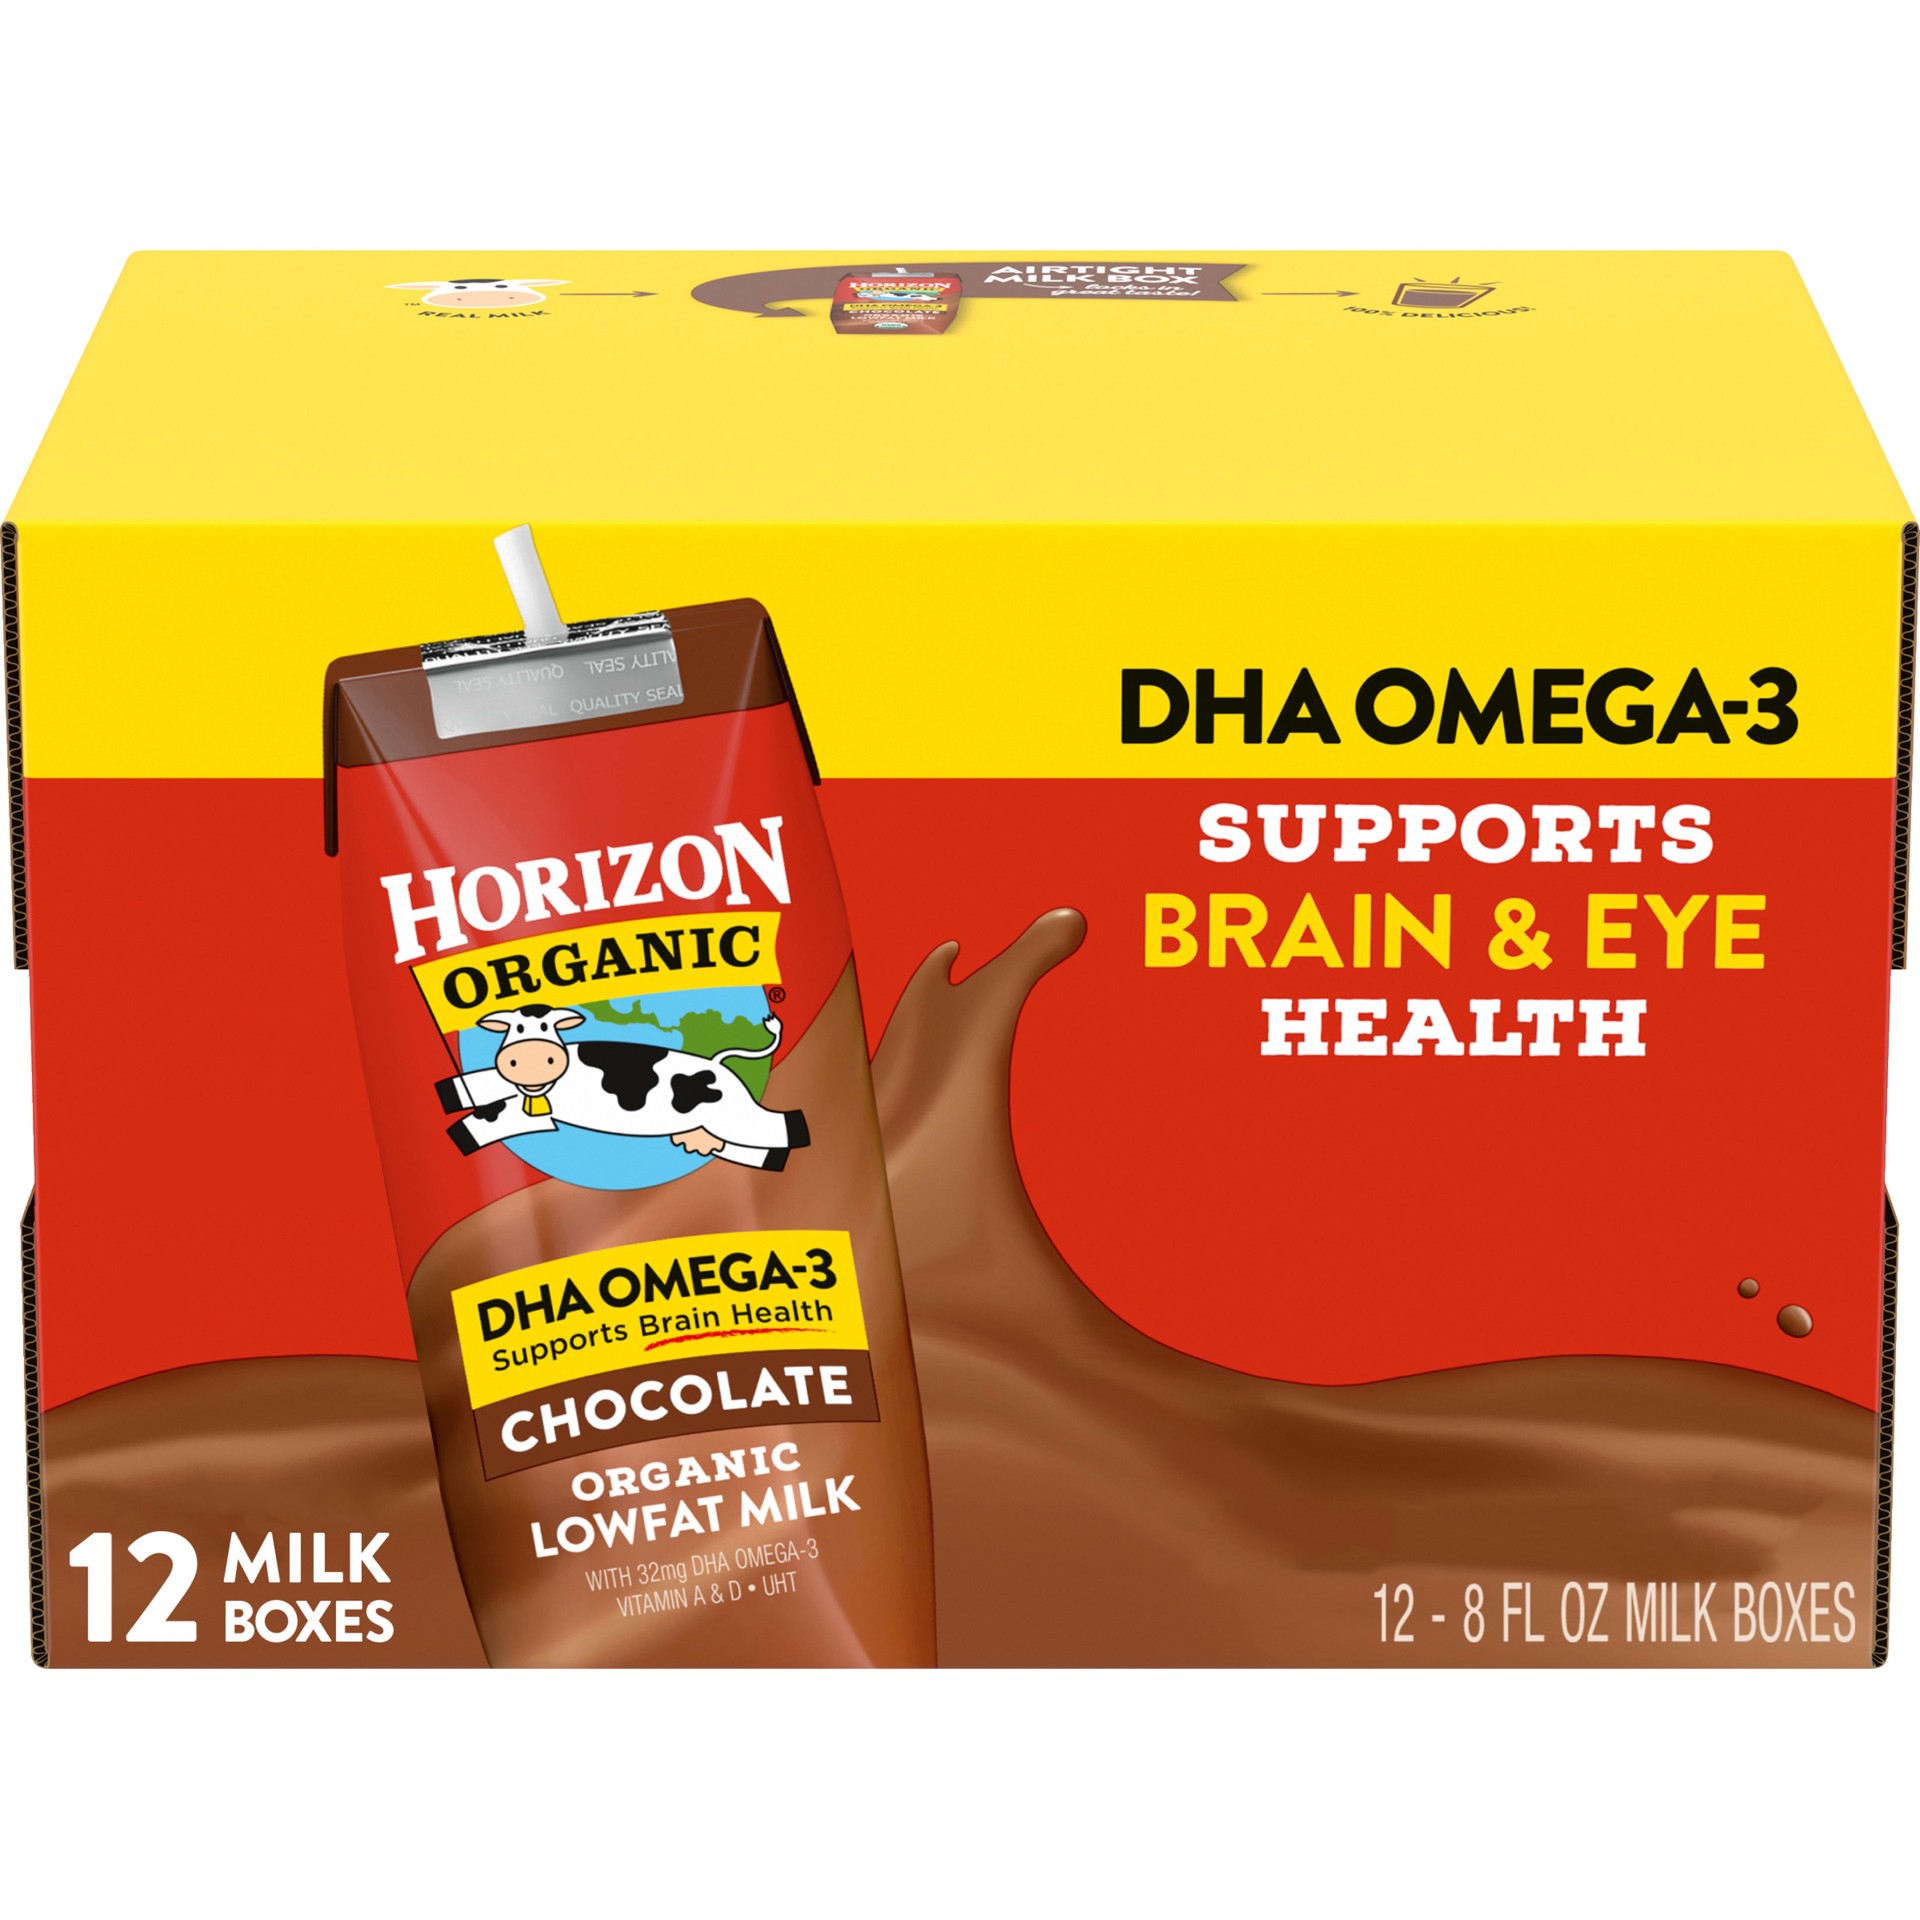 slide 1 of 12, Horizon Organic Shelf-Stable 1% Low Fat milk Boxes with DHA Omega-3, Chocolate, 8 oz., 12 Pack, 8 fl oz